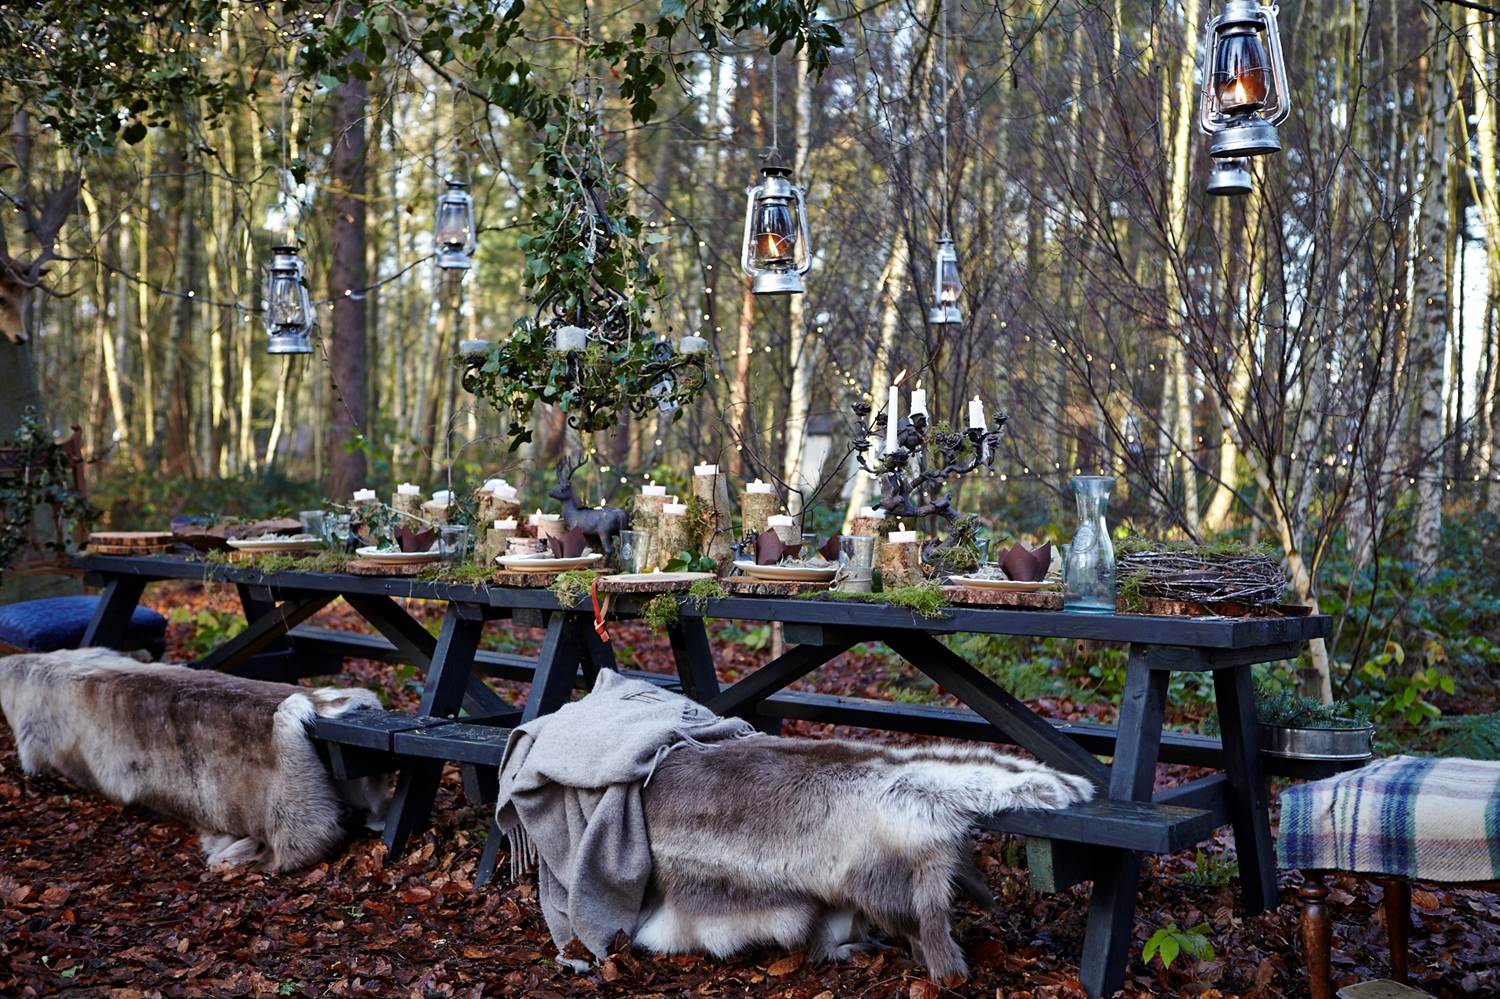 A picnic bench with hanging lanterns above.